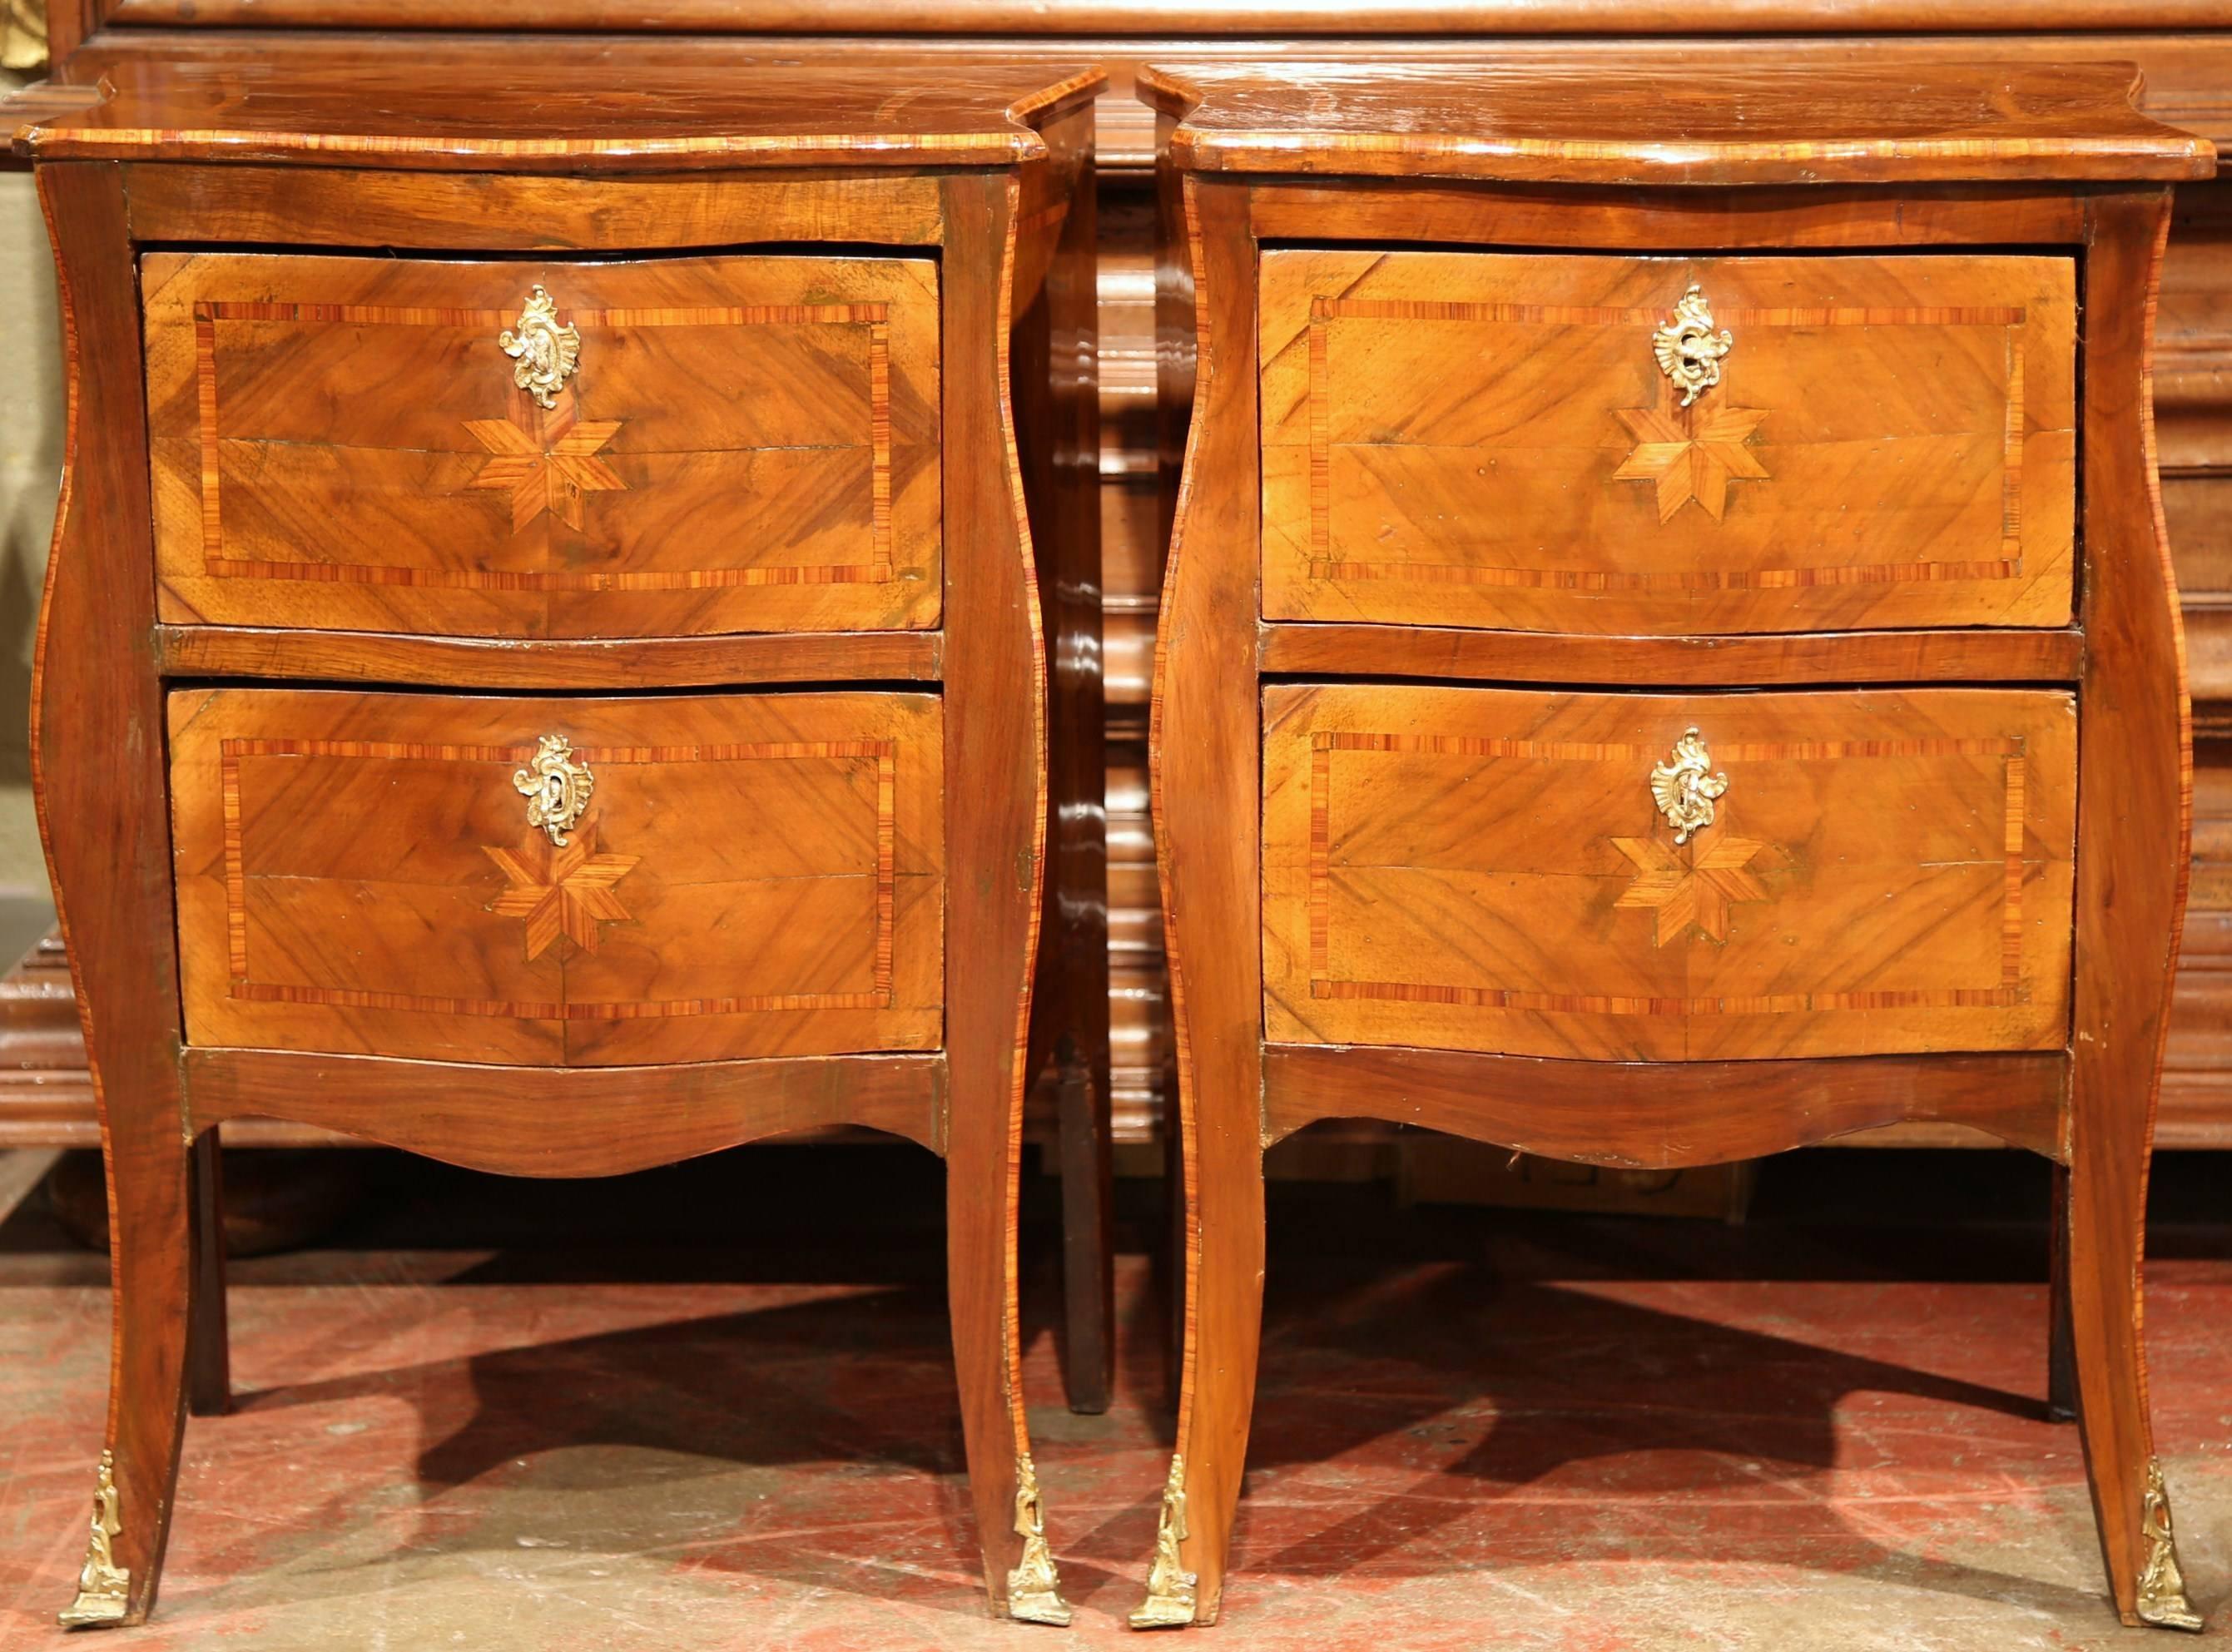 Complete your bedroom with this elegant pair of antique fruitwood bombe commodes. Crafted in Paris, France, circa 1860, each chest features beautiful marquetry work on all sides with a large star in the centre of each panel. The cabinets have two